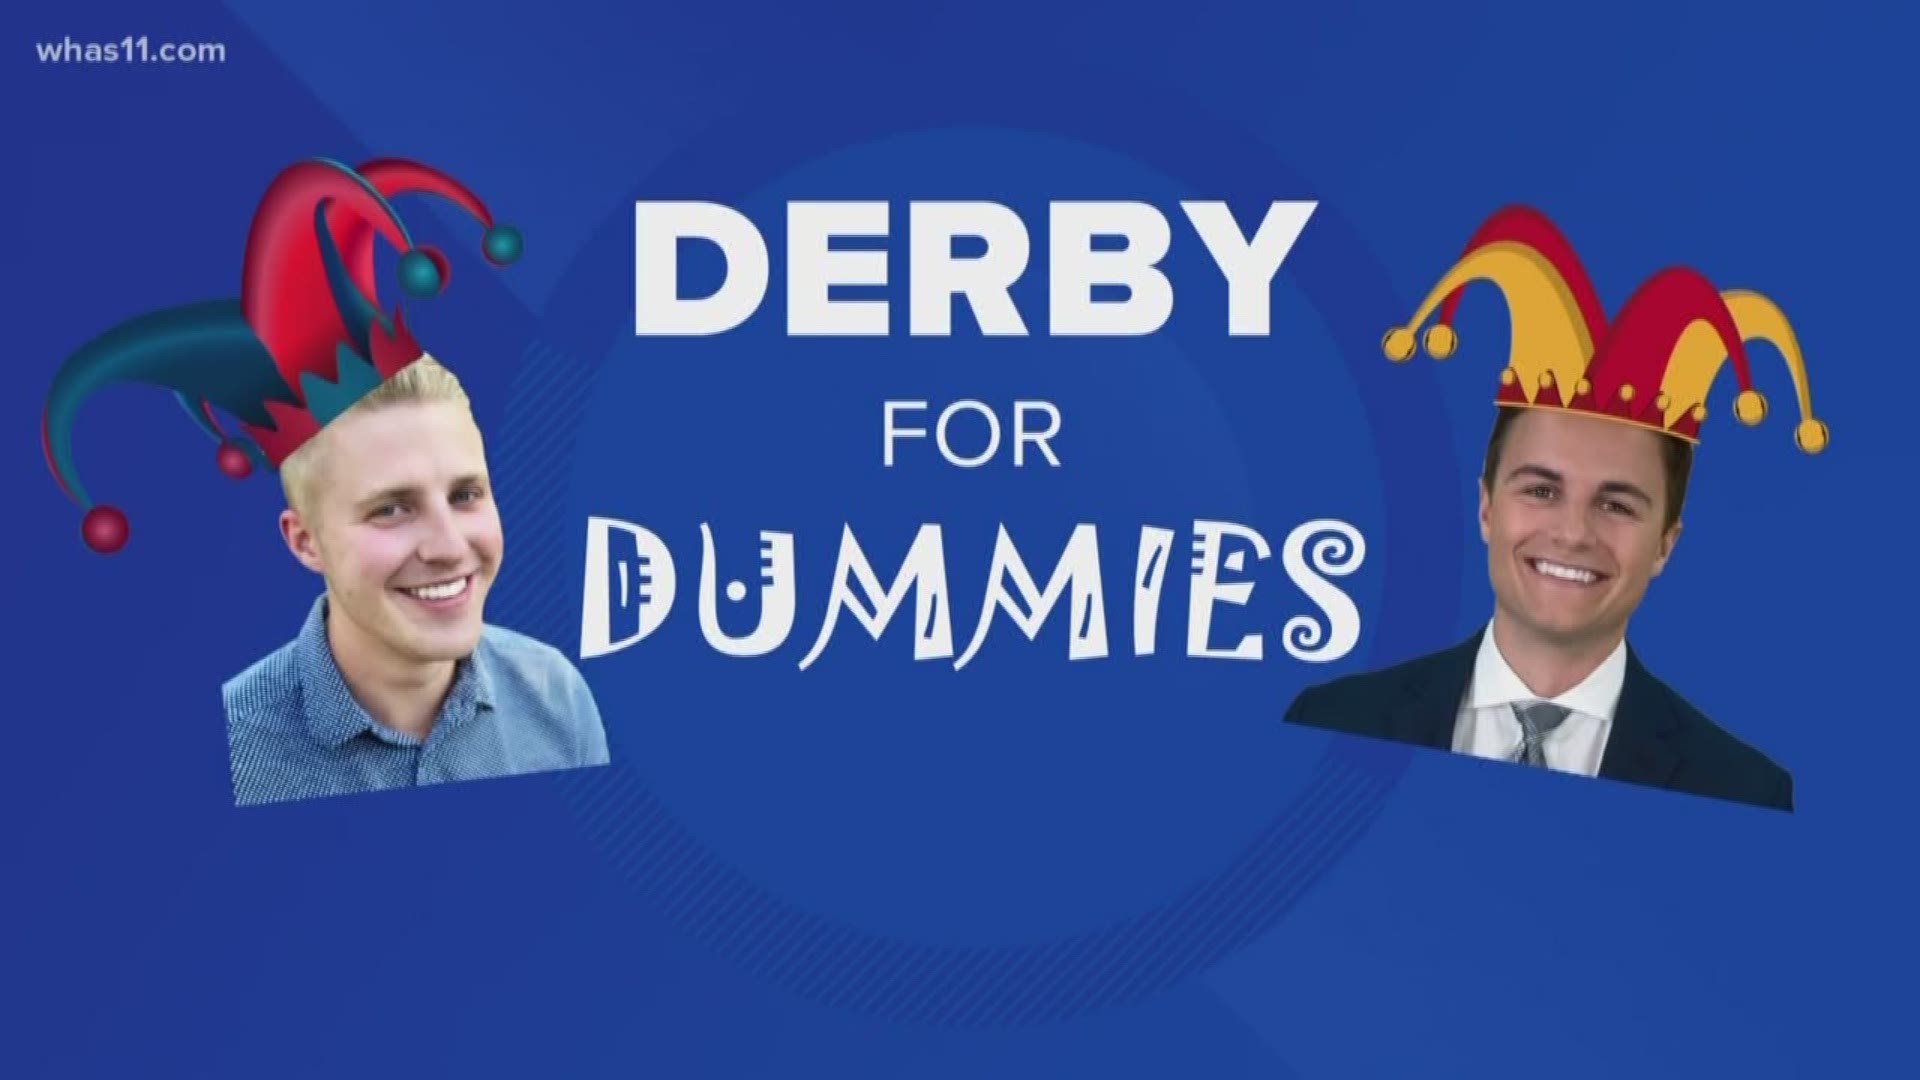 If you want to take home some extra cash after a visit to the track, you'll have to bet on some horses. Here are some betting basics so you don't sound like a "Derby Dummy".